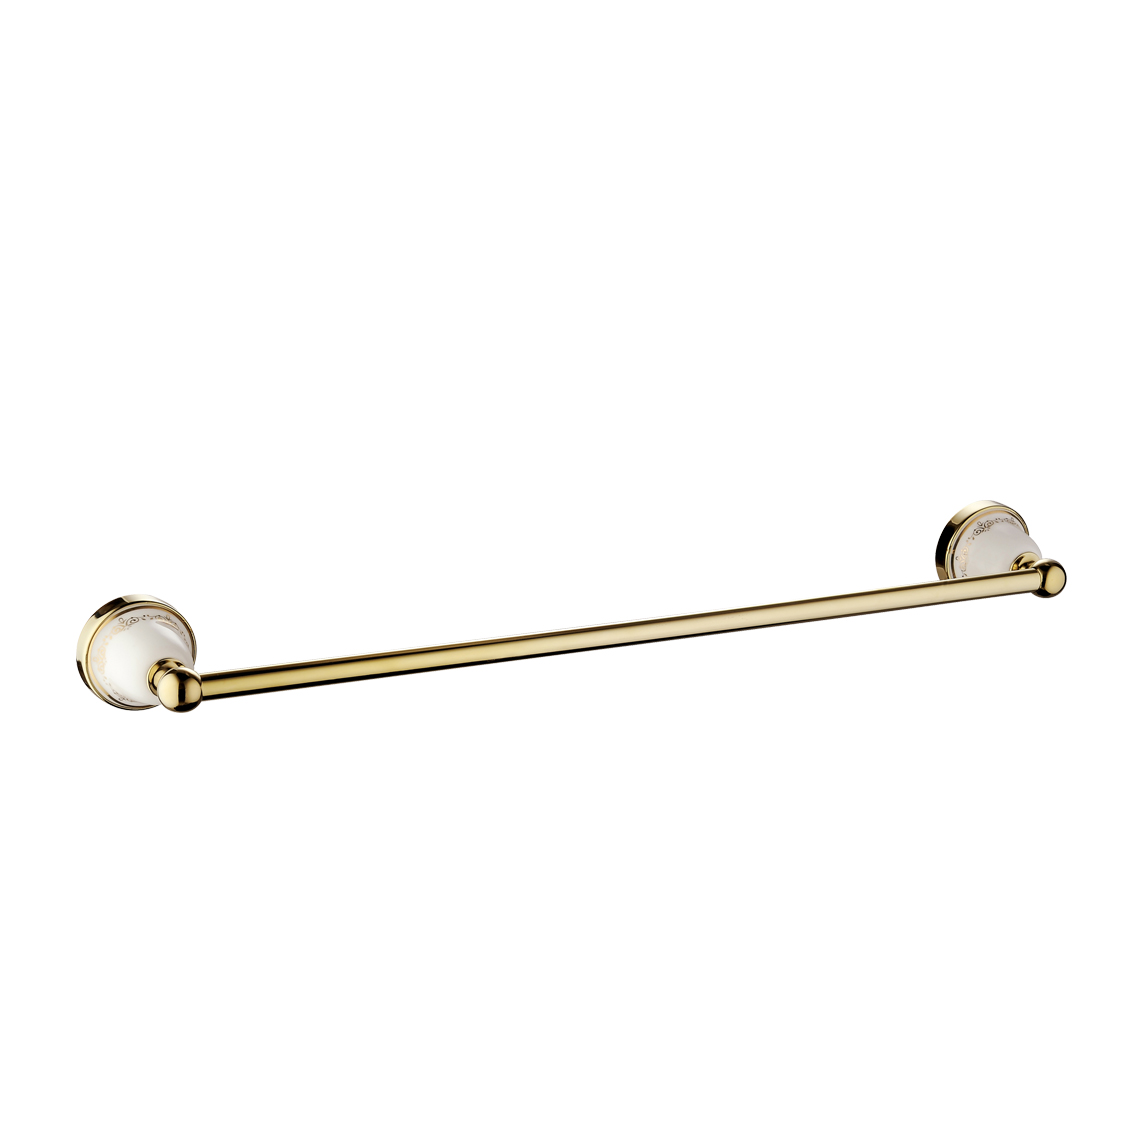 China Manufacturer for Brass Single Towel Bar - gold plated decorative patterns ceramic metal  Wall Mounted Towel bar for Bathroom 1811 – Bodi